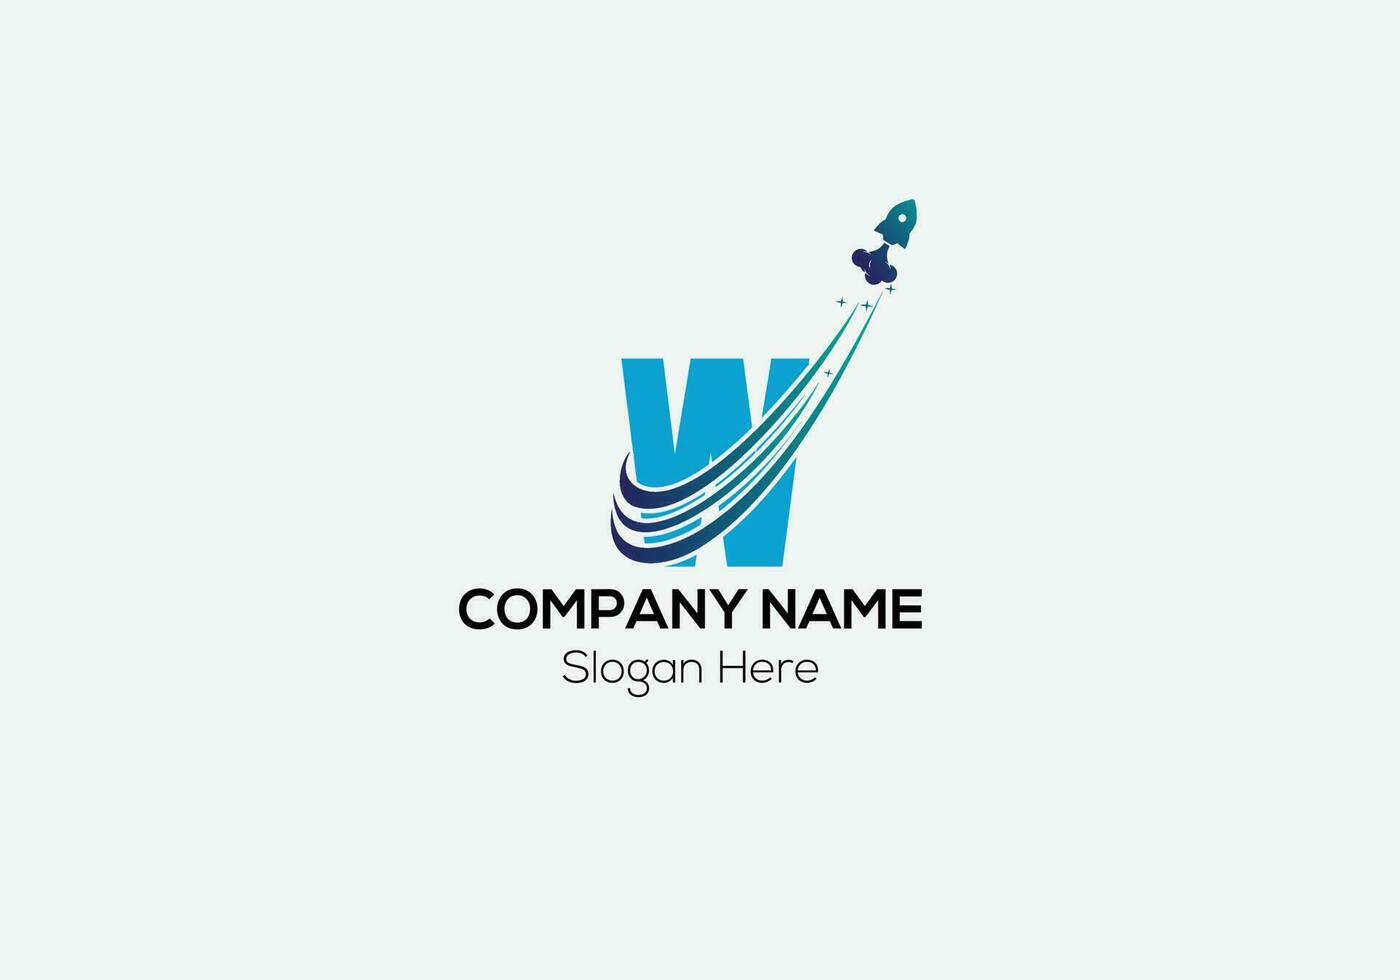 Travel Logo On Letter W Template. Travel Logo On W Letter, Initial Travel Sign Concept Template vector